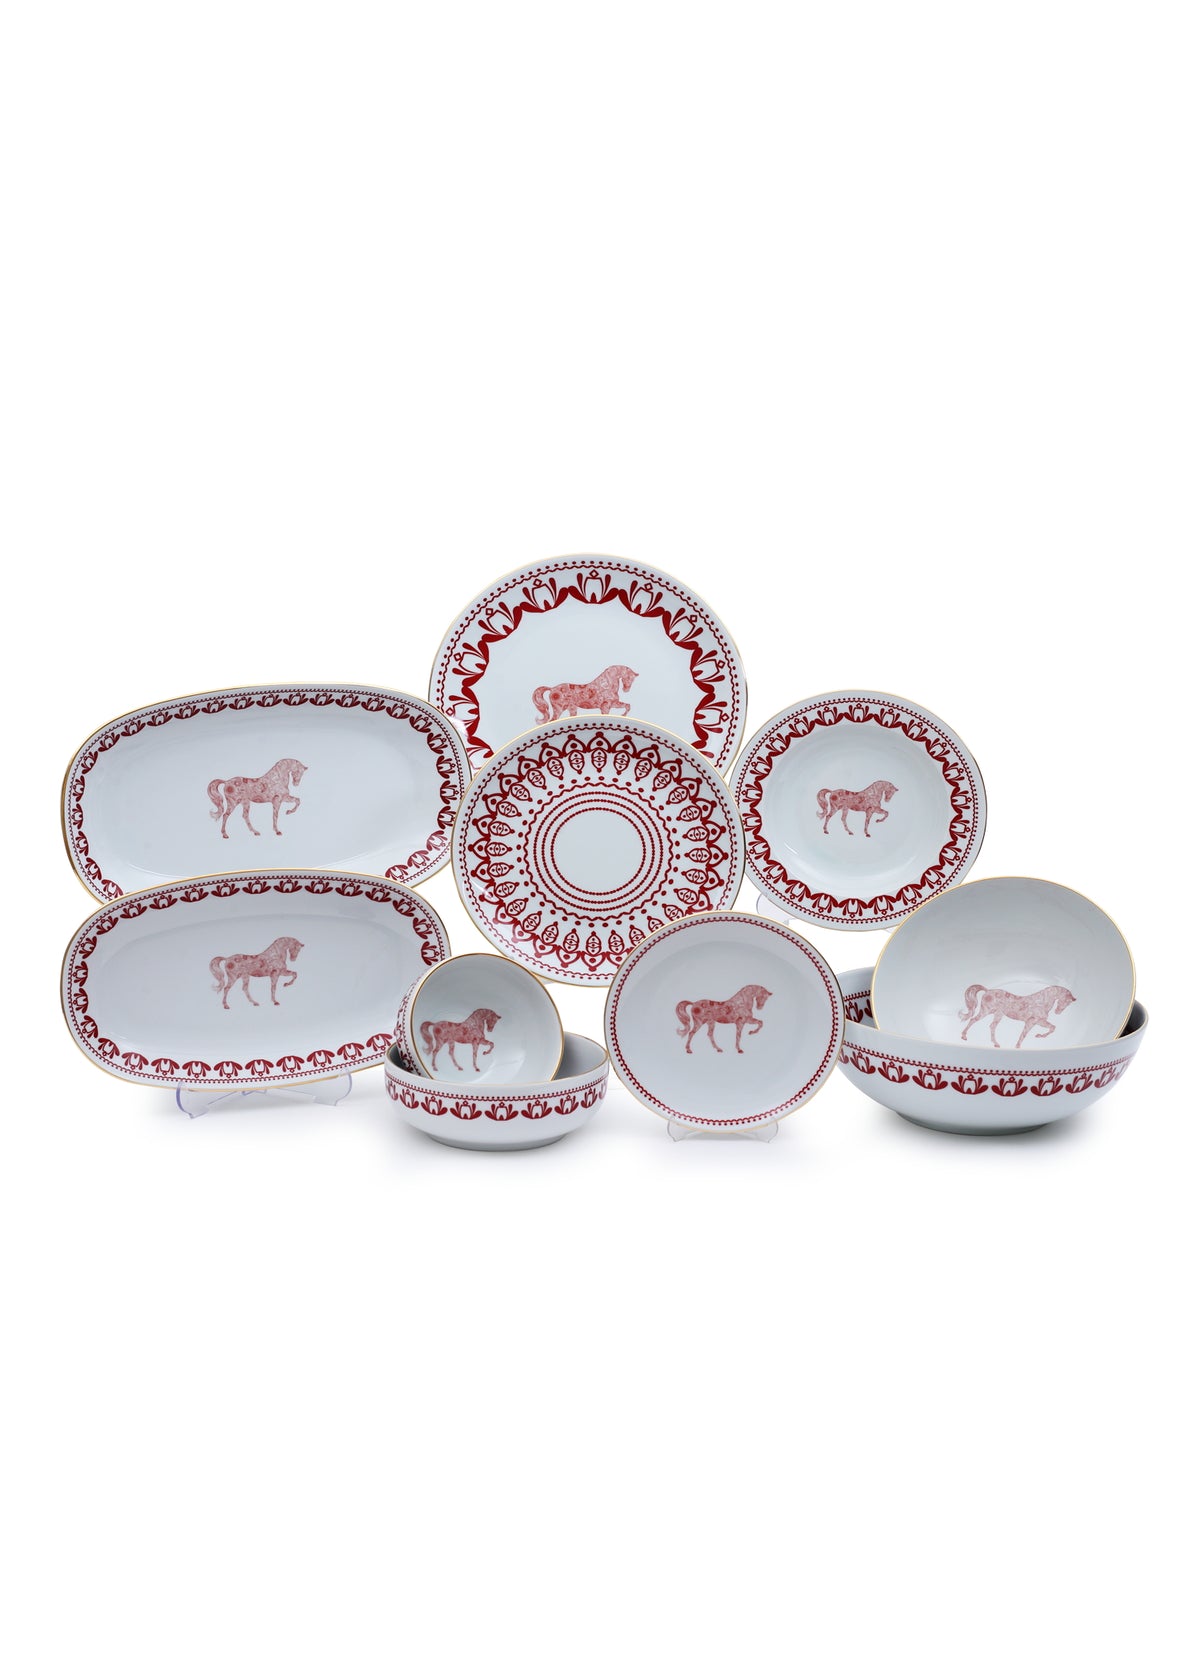 Horse Luck Collection-Red Set of 12 Plates (82 pieces)